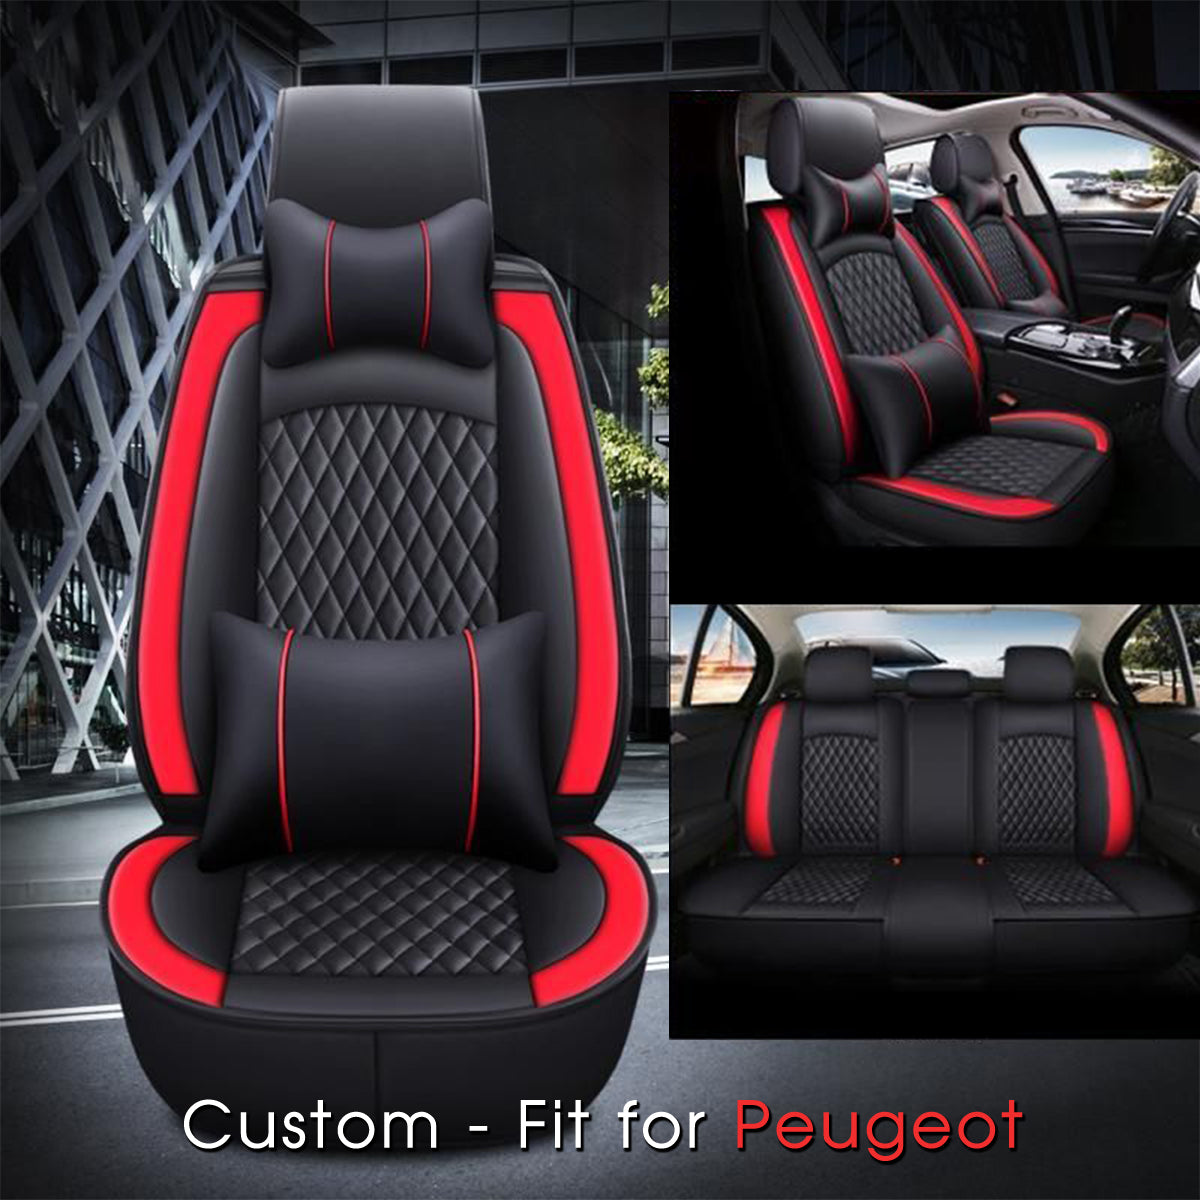 2 Car Seat Covers Full Set, Custom-Fit For Car, Waterproof Leather Front Rear Seat Automotive Protection Cushions, Car Accessories DLPE211